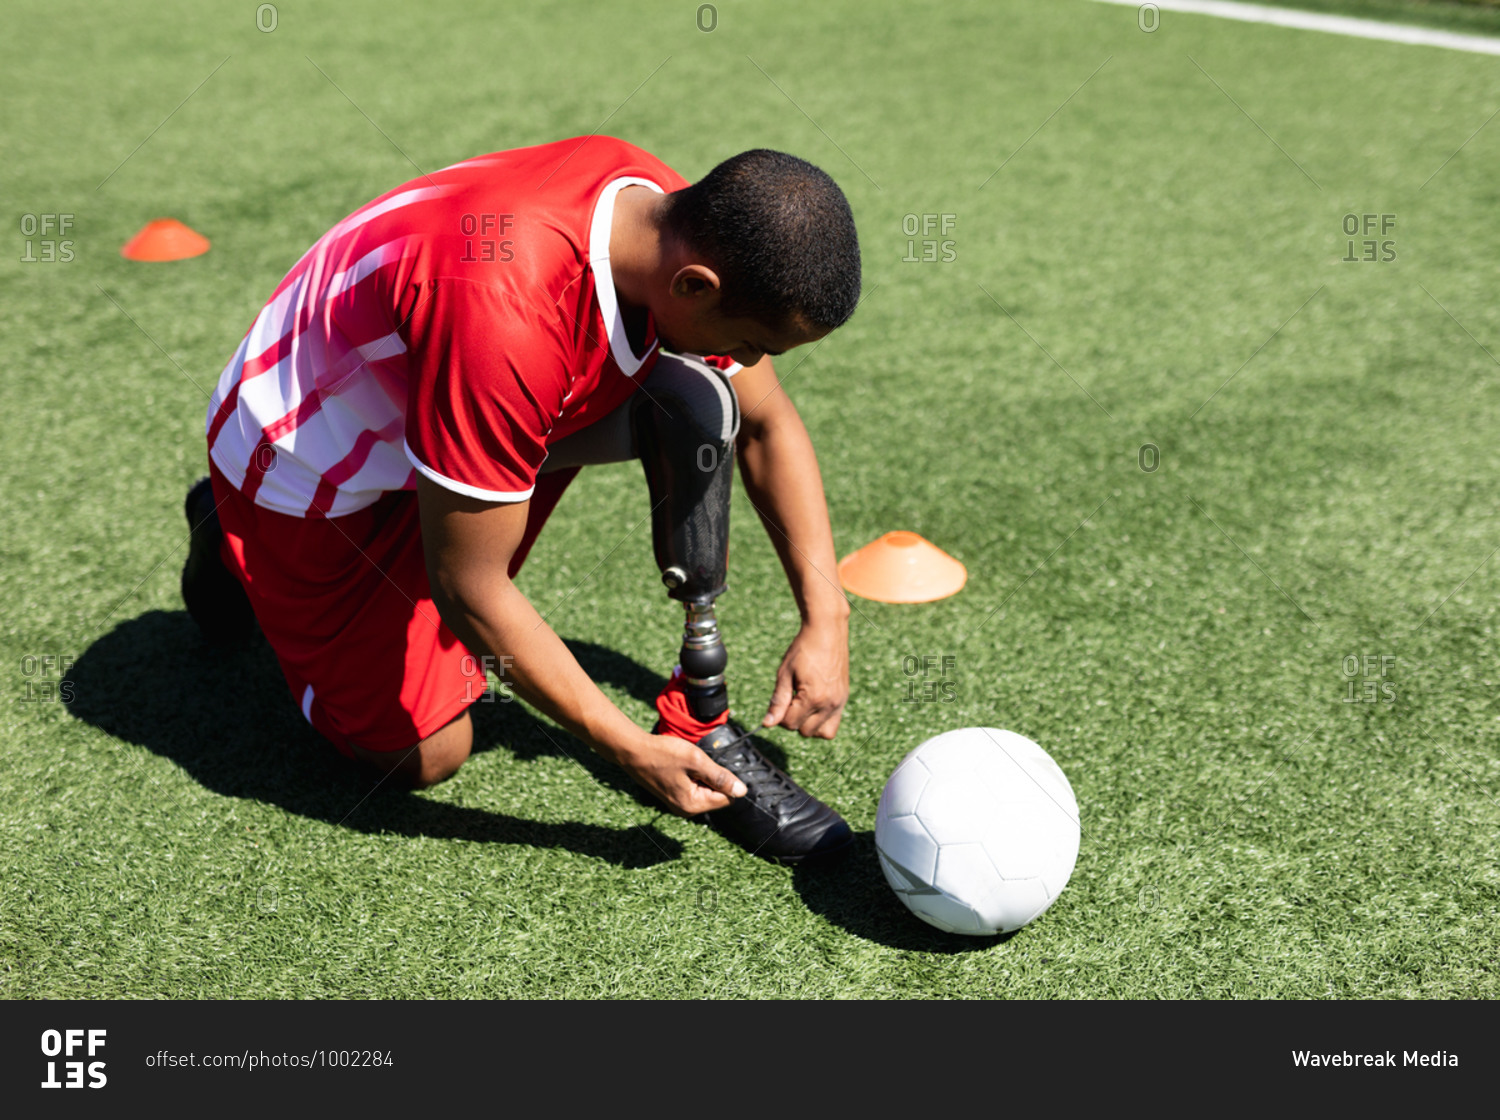 Mixed race male football player with prosthetic leg wearing a team strip training at a sports field in the sun, tying shoelaces ball next to him.